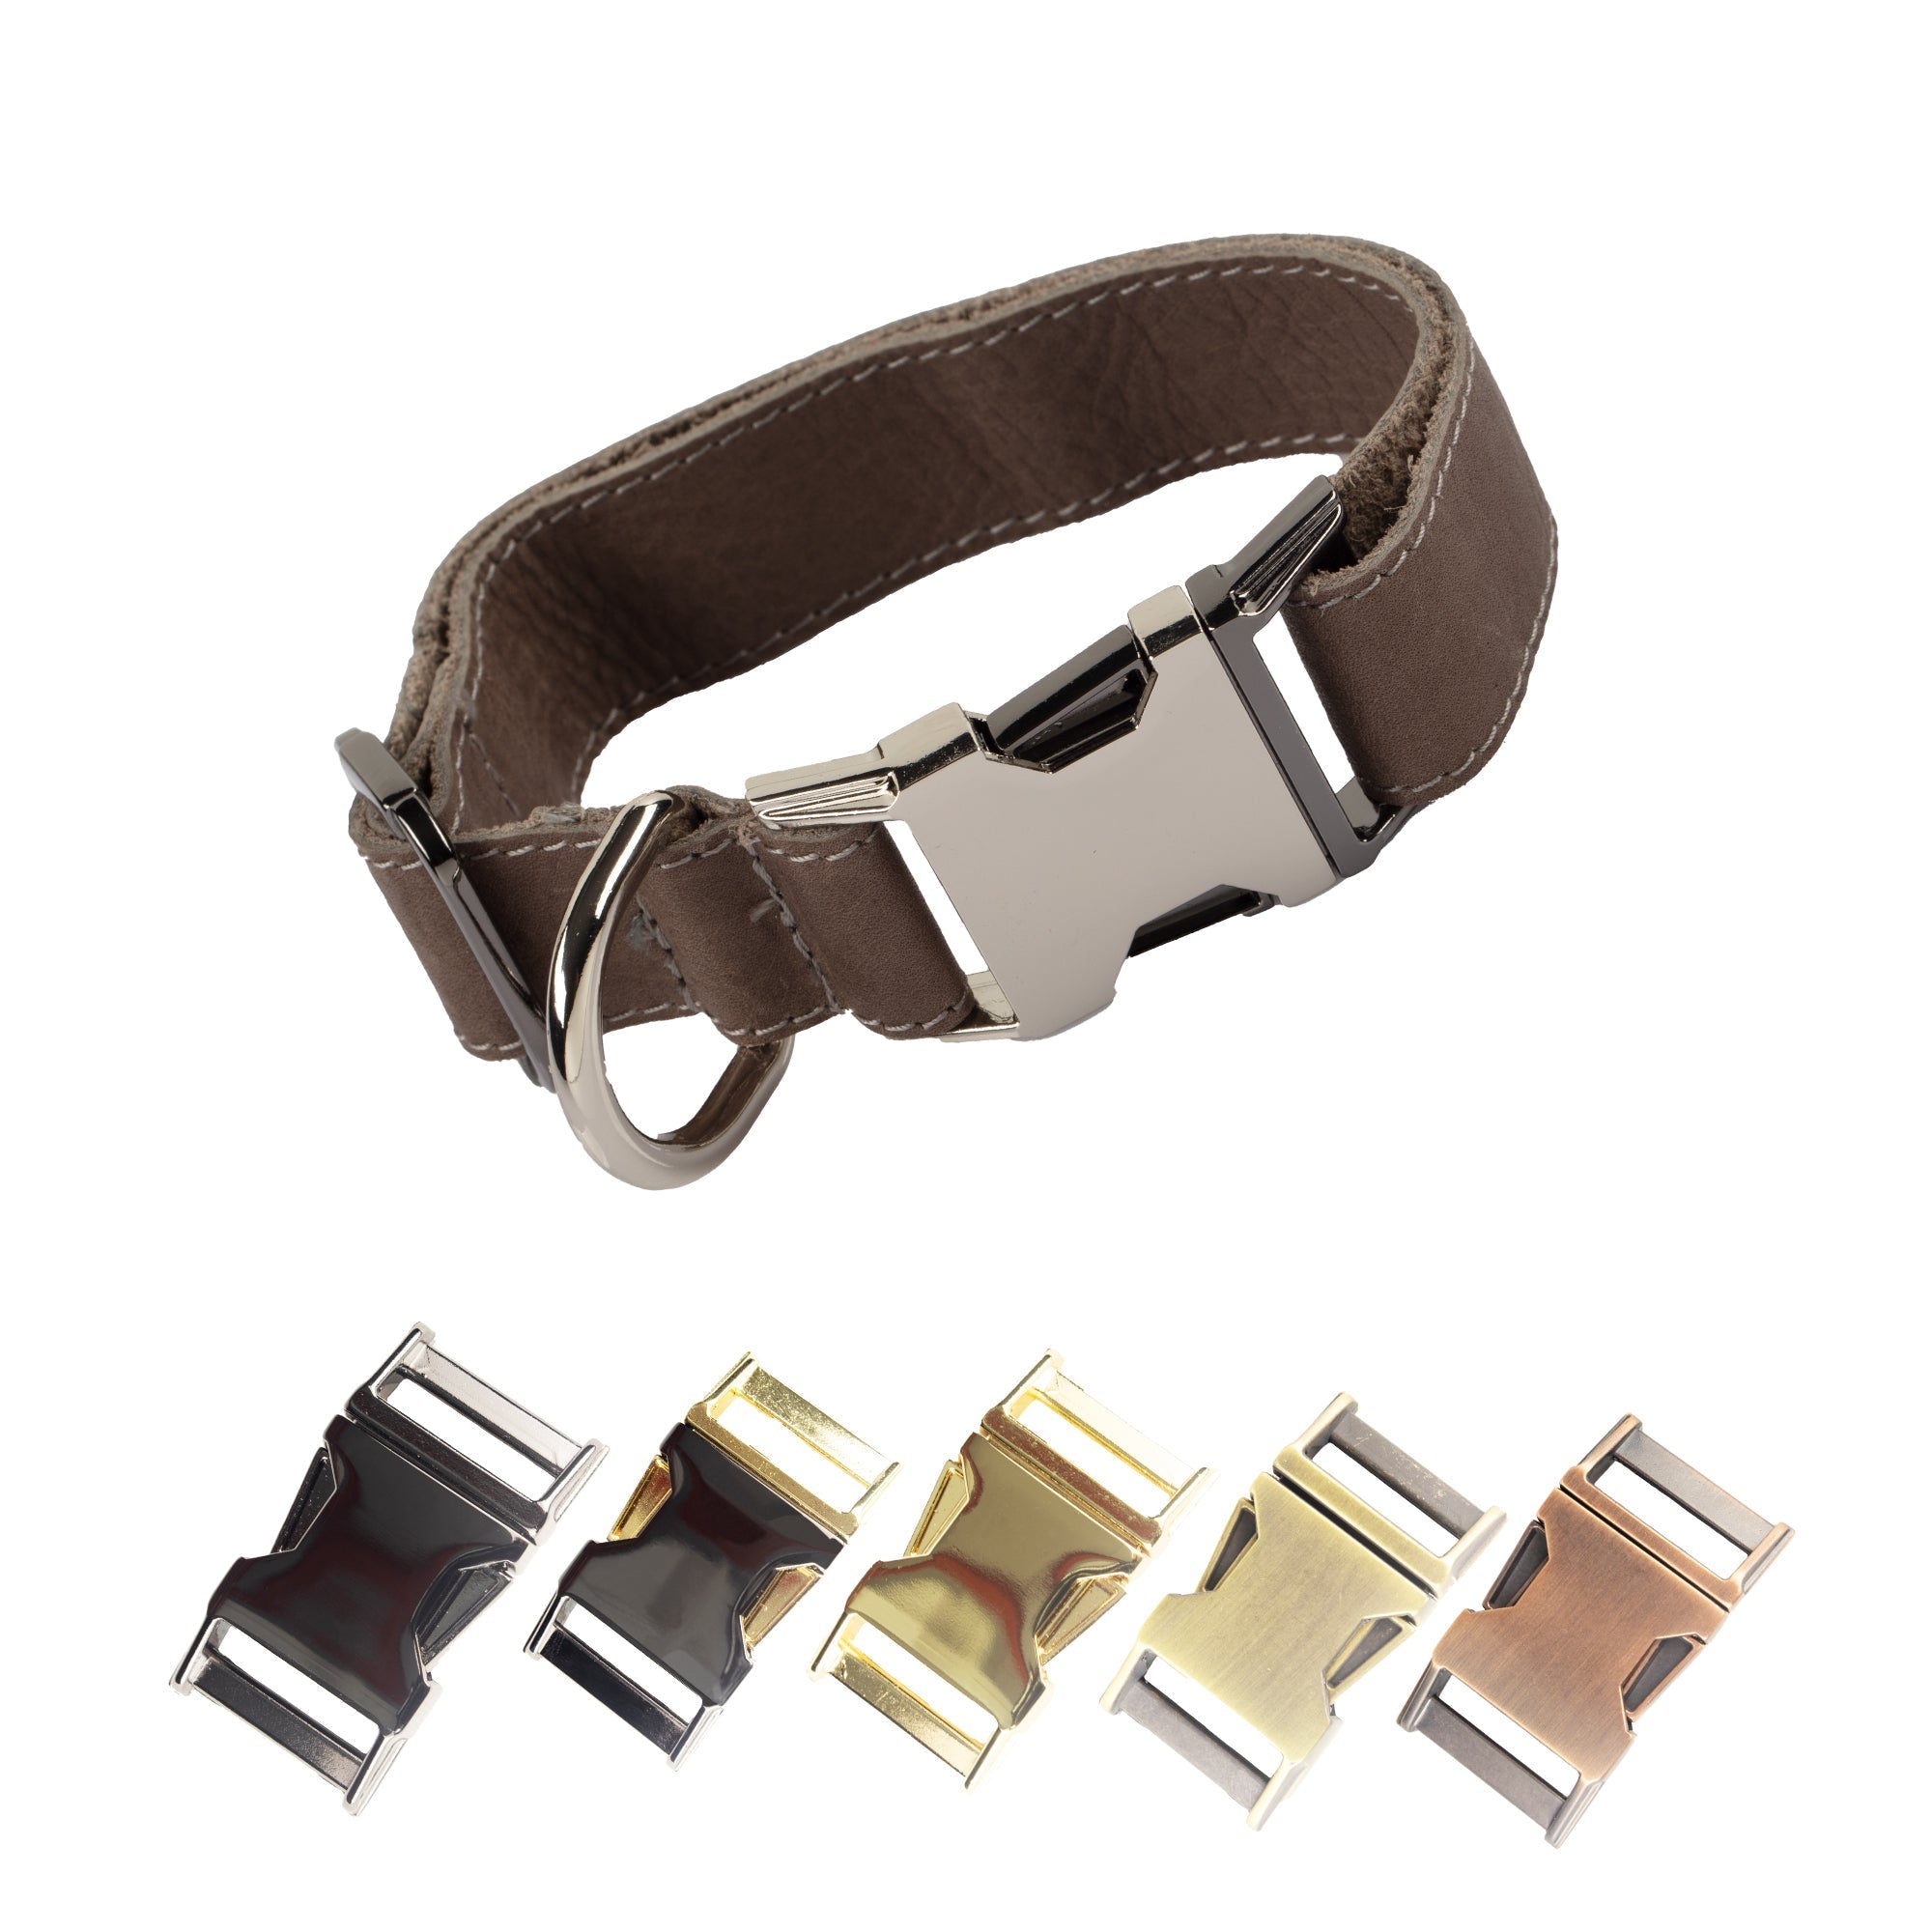 LupinnyLeather Genuine Leather Adjustable Strong Dog Collar for Large Medium Small Dogs 84